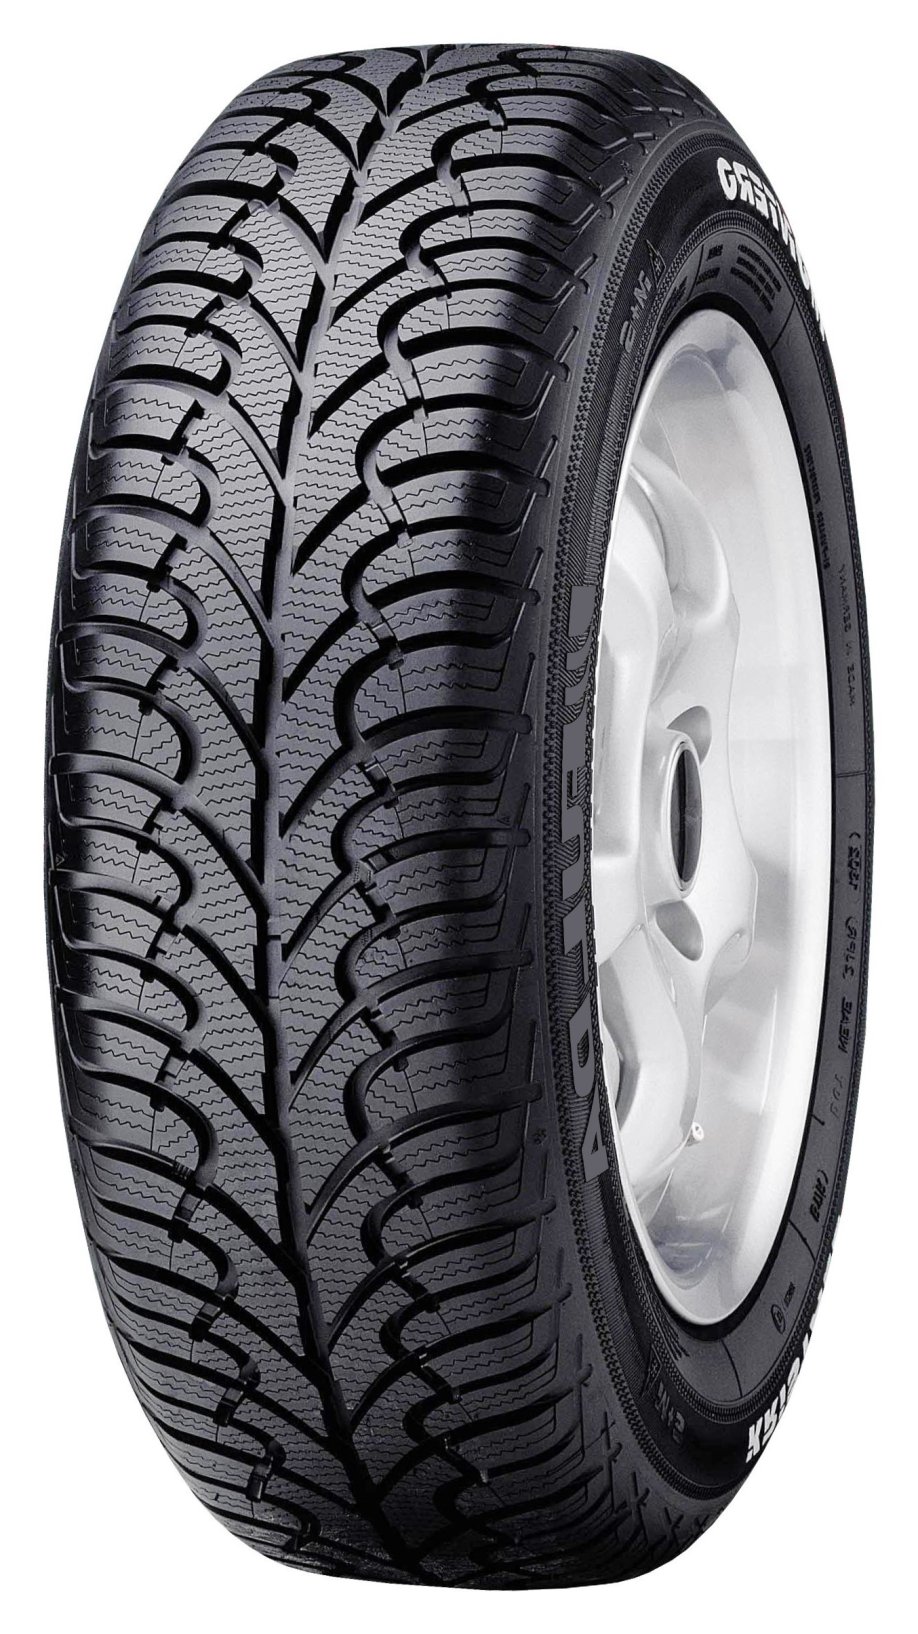 Gomme Nuove Fulda 155/70 R13 75T MONT2 M+S pneumatici nuovi Invernale